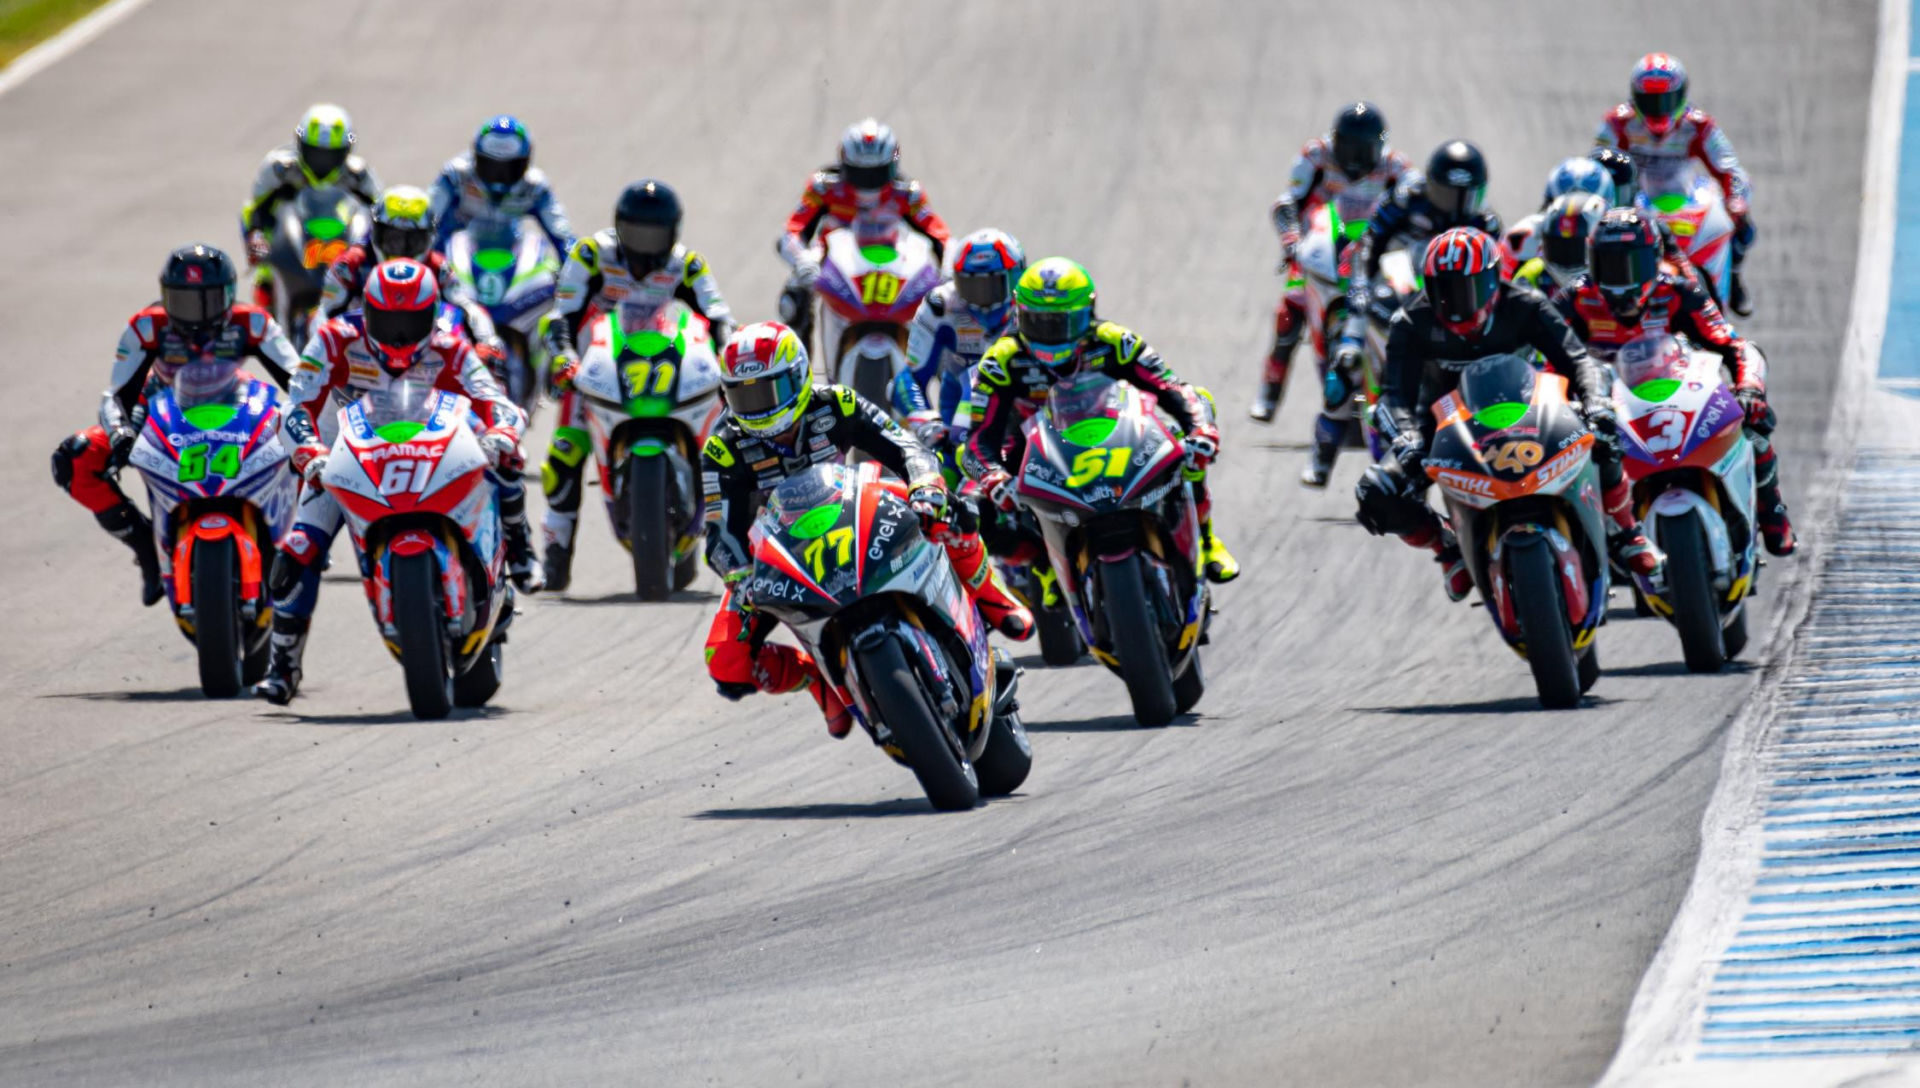 The FIM MotoE World Cup returns to action this coming weekend at Red Bull Ring. Photo courtesy Dorna.